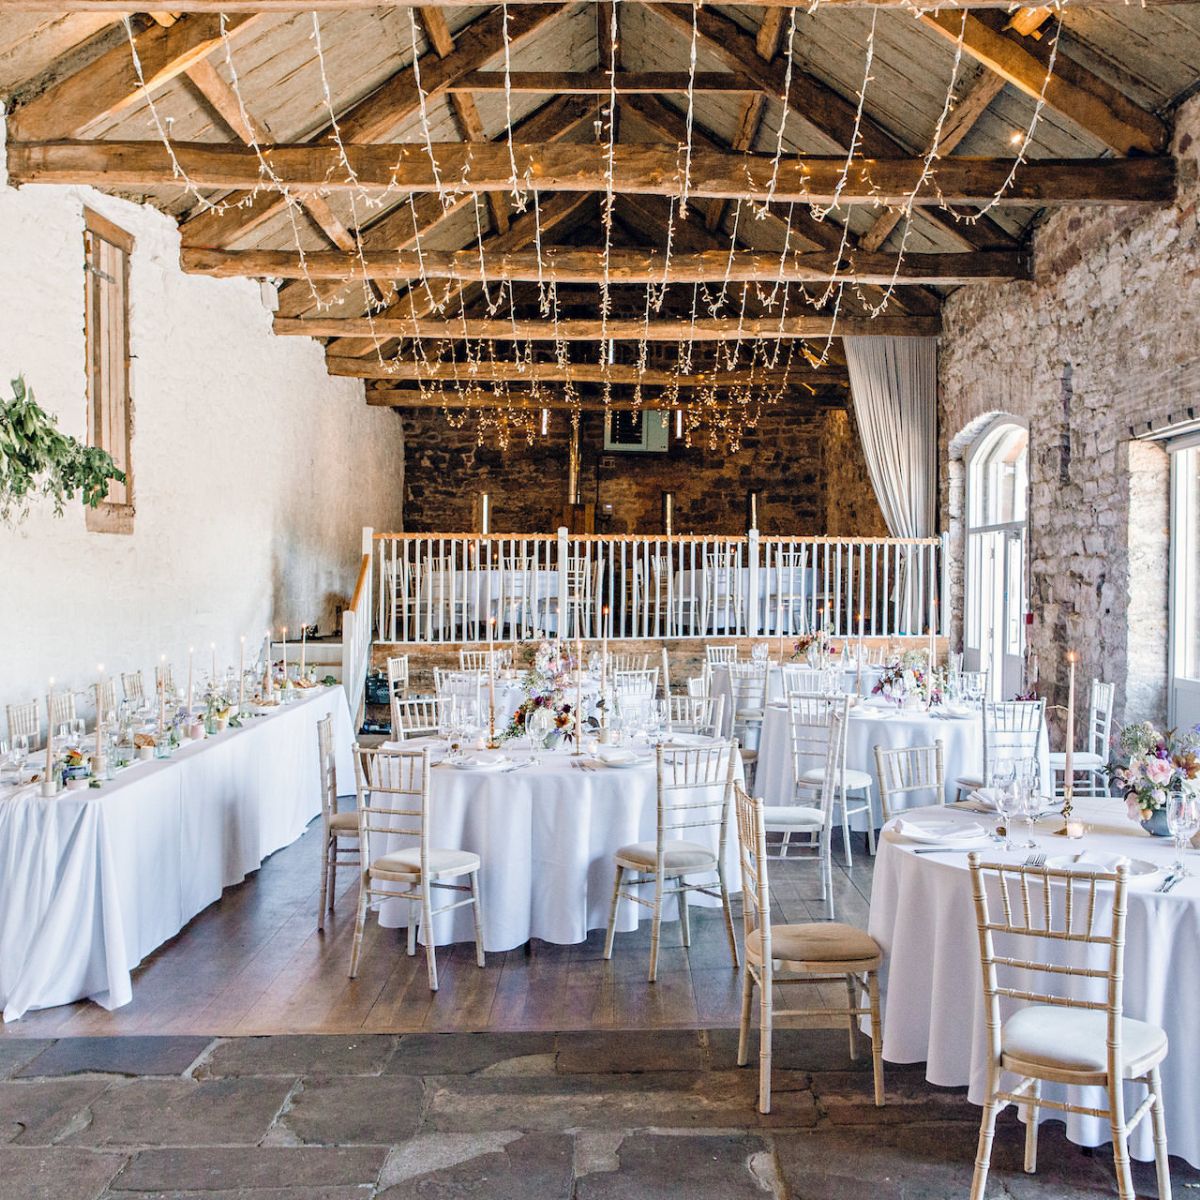 What is Exclusive Use? - A Wedding Venue All To Yourself